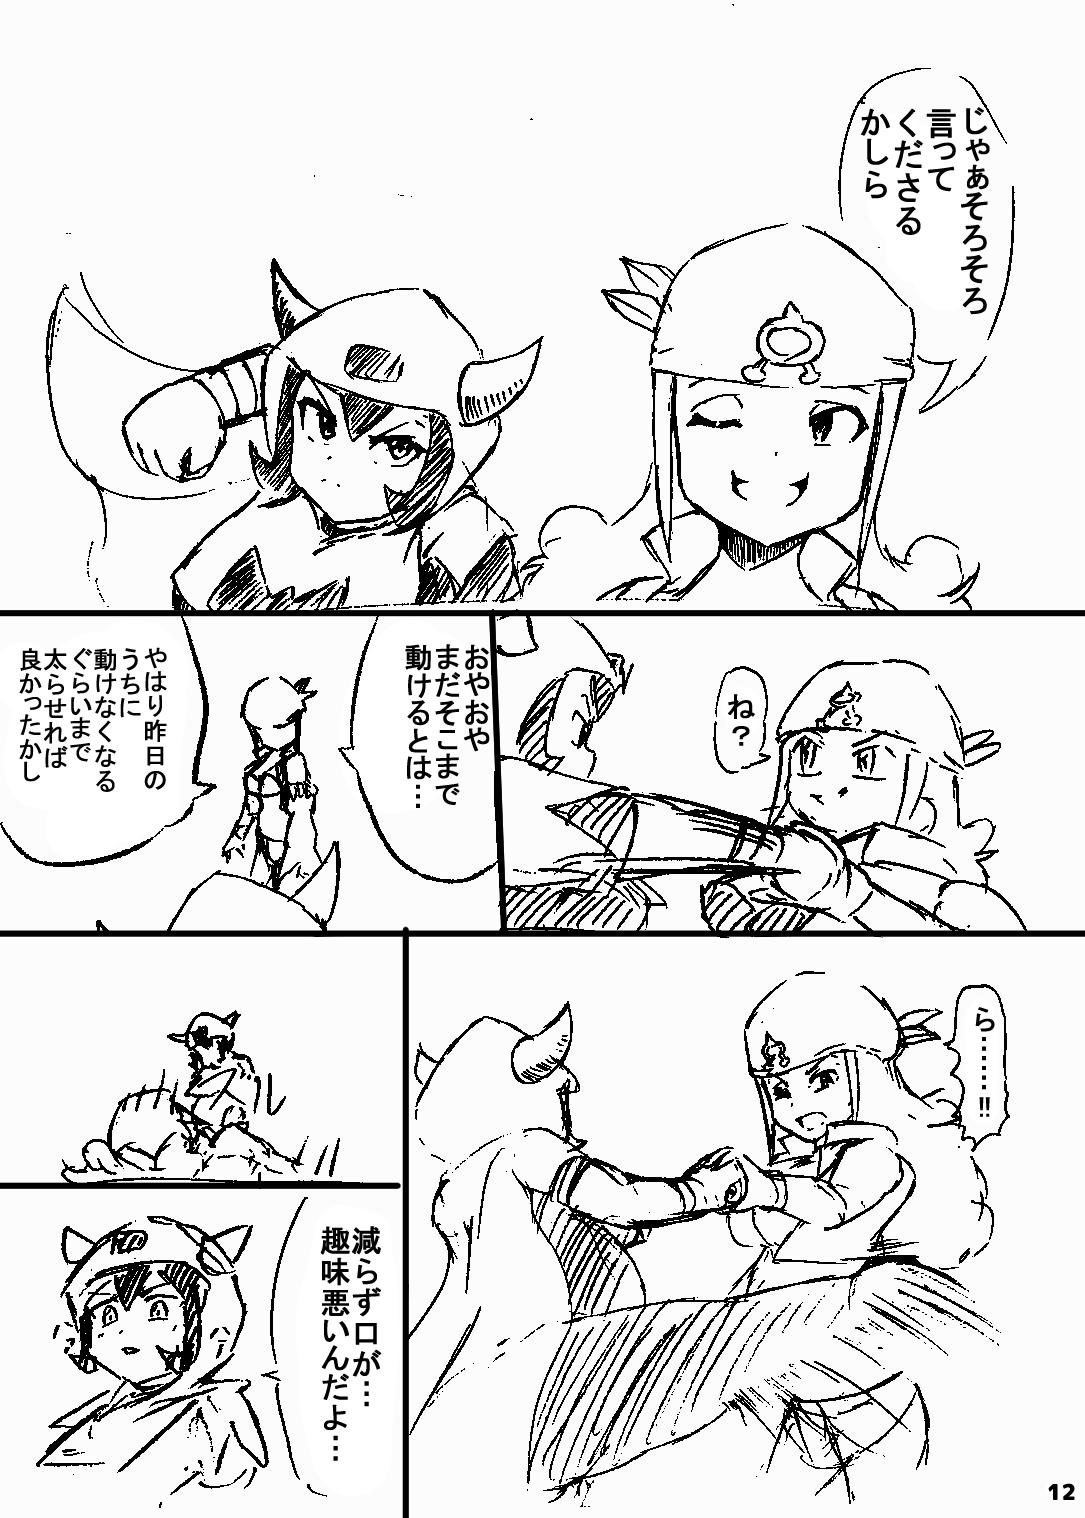 Chibola ポケスペカガリ肥満化漫画 - Pokemon Perfect Body - Page 11